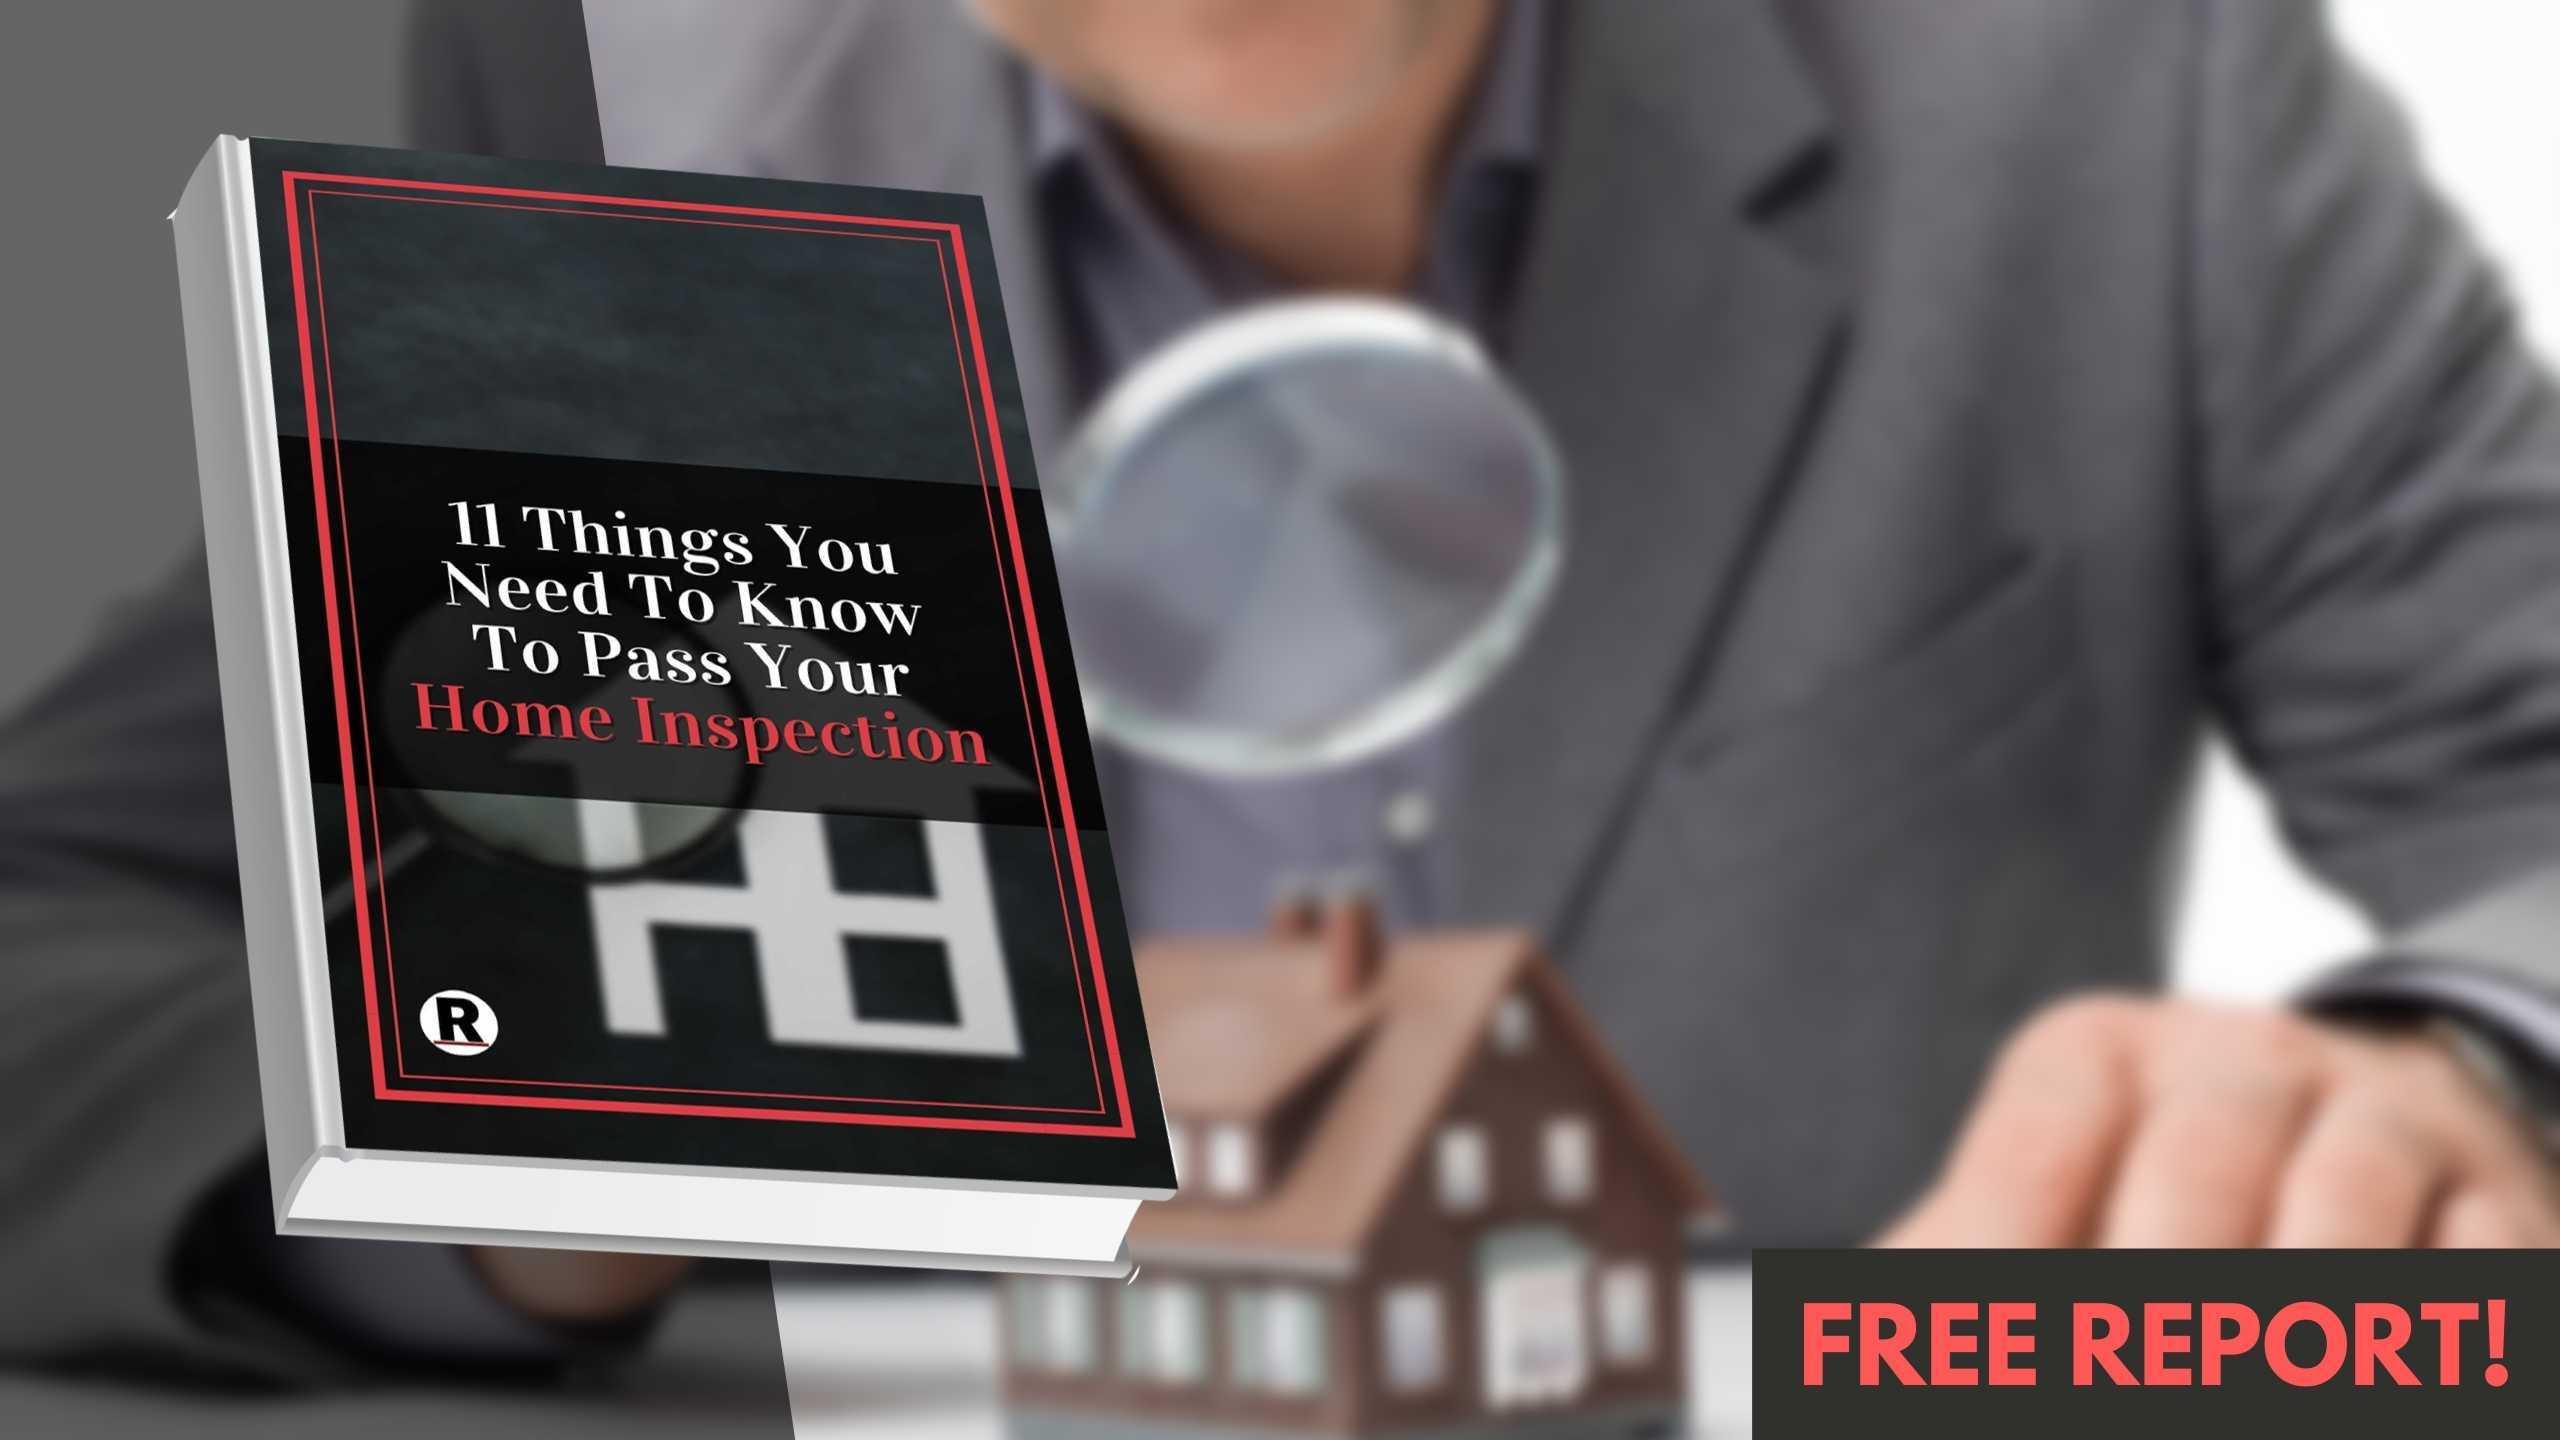 11 Things You Need To Know To Pass Your Home Inspection